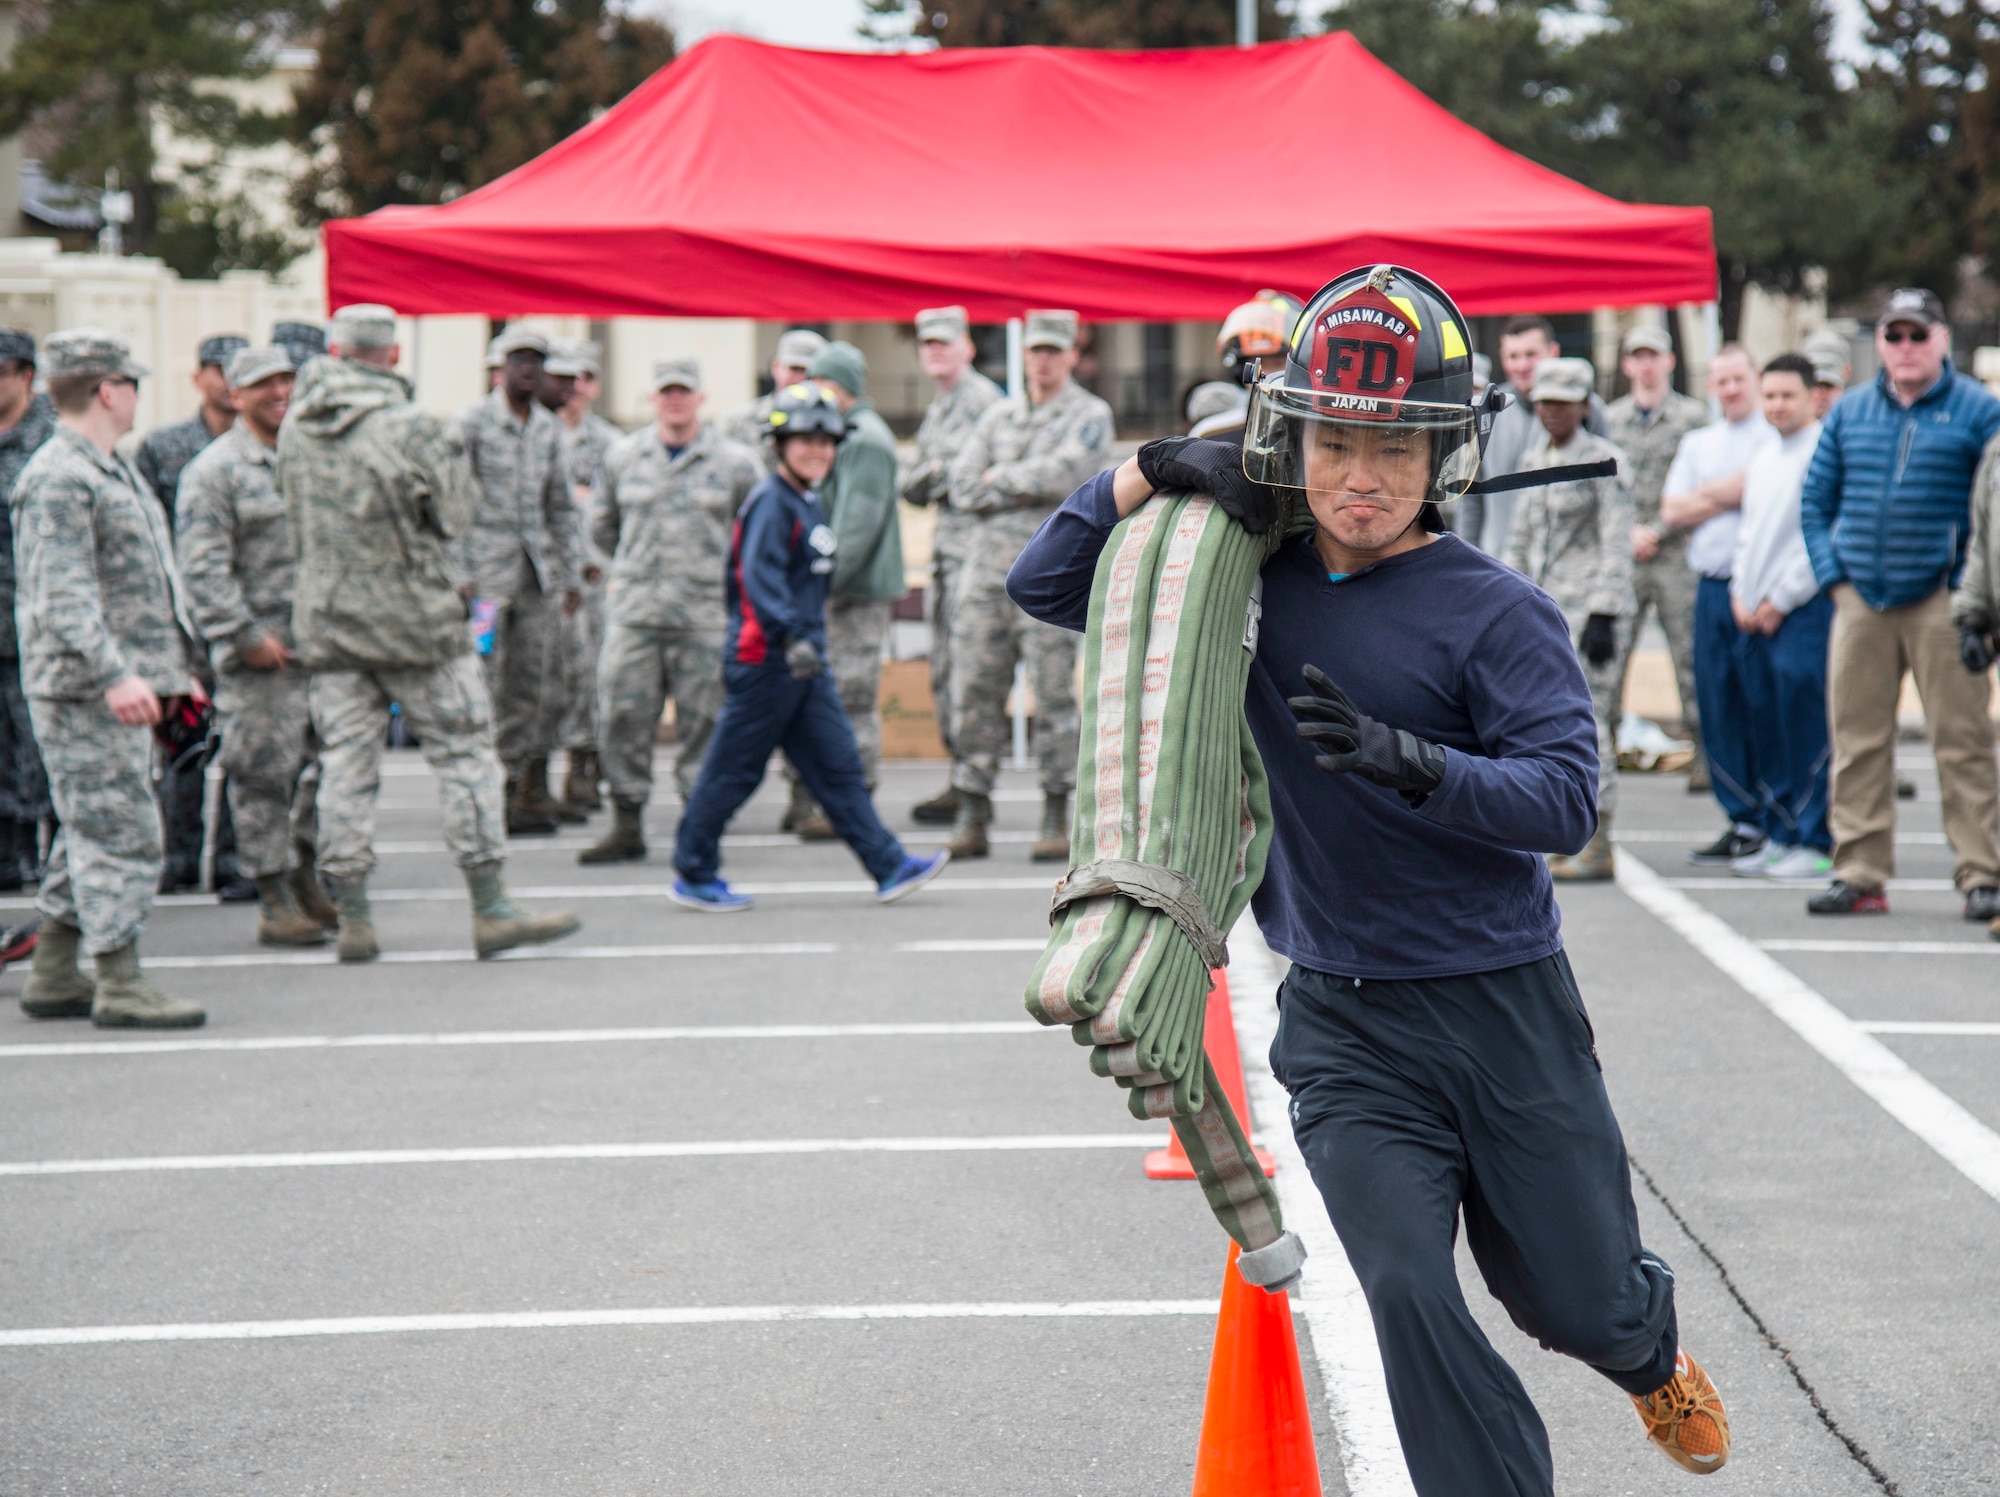 A Japanese National runs with a fire hose during Wingman Day at Misawa Air Base, Japan, March 31, 2017. During the firetruck pull event, teams had to complete three stations, which included a body drag, hose run and a firetruck pull. (U.S. Air Force Senior Airmen Brittany A. Chase)